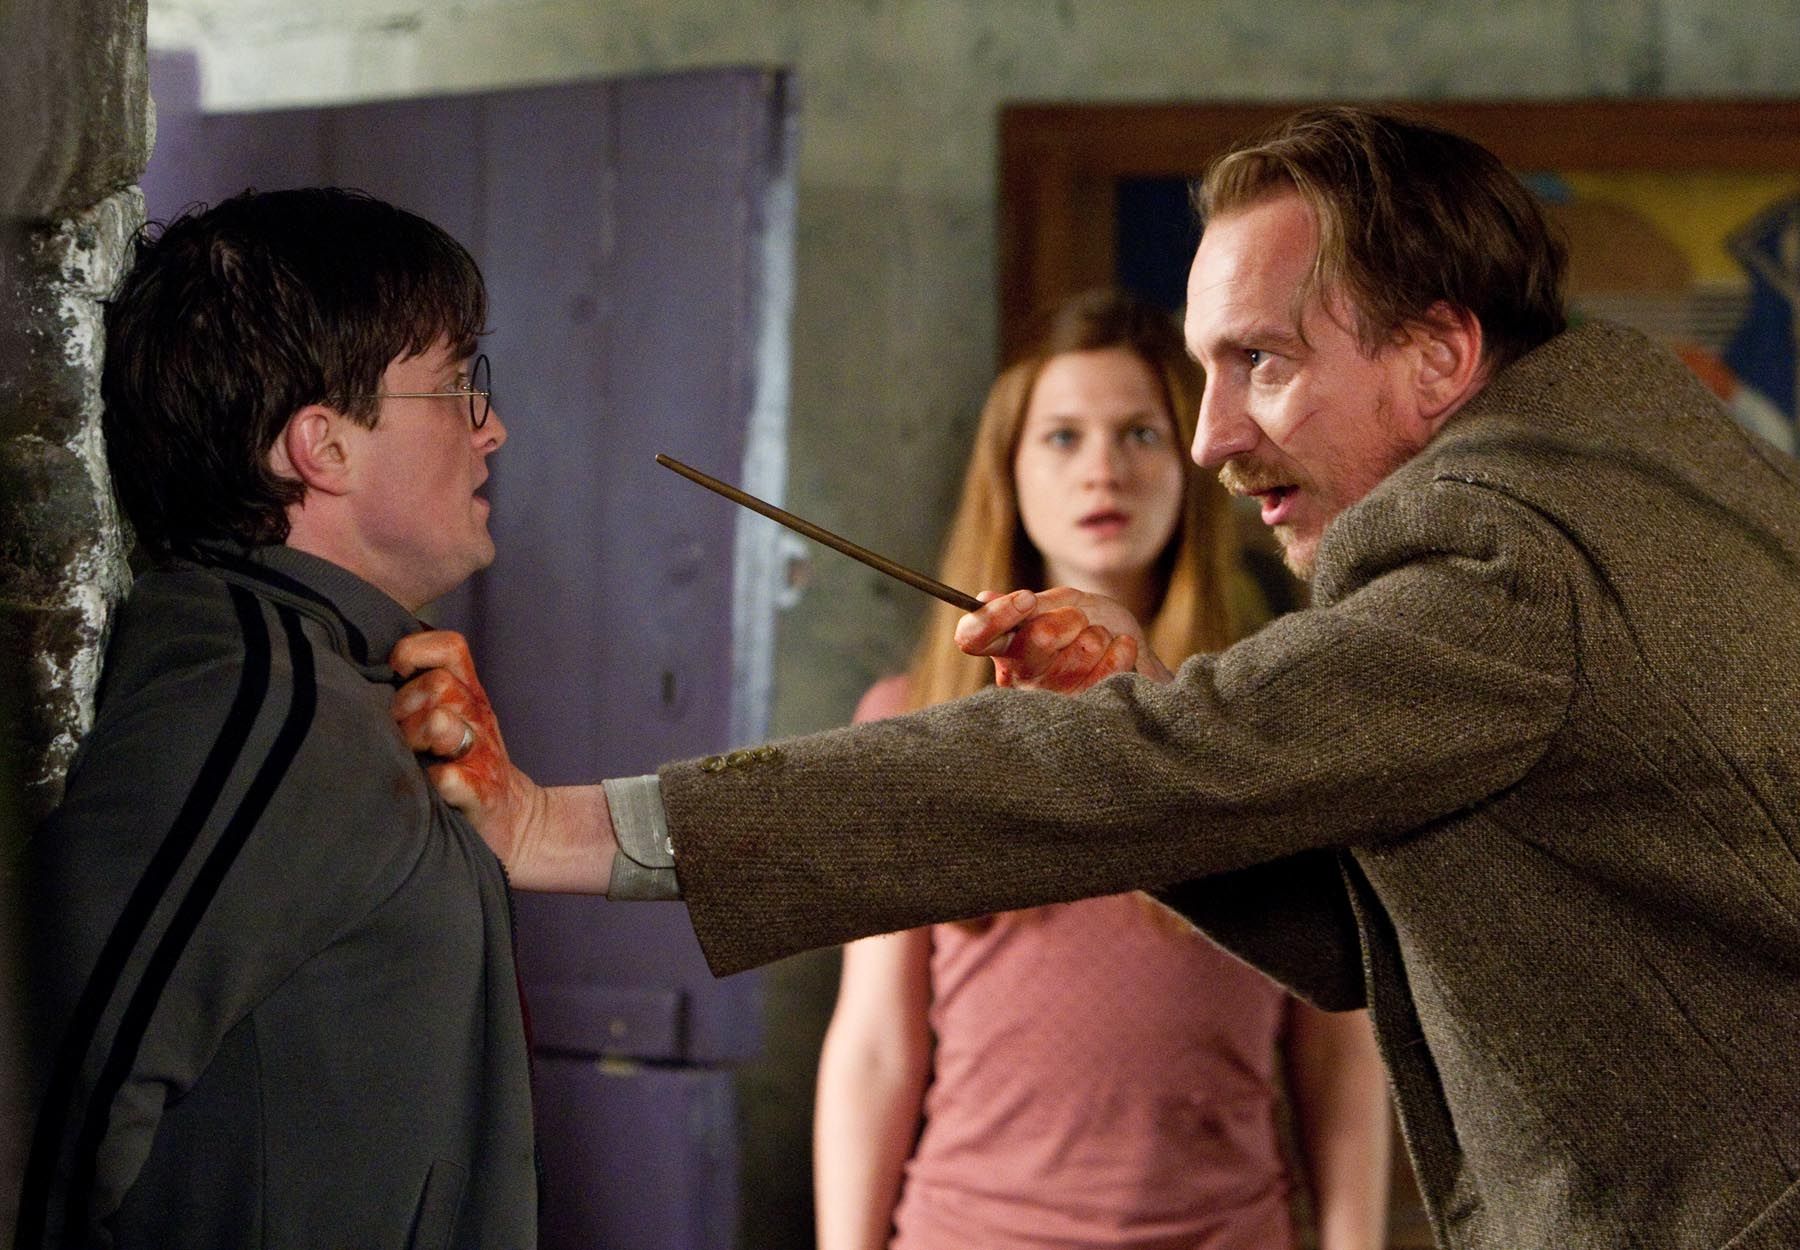 David Thewlis and Daniel Radcliffe in Harry Potter and the Deathly Hallows